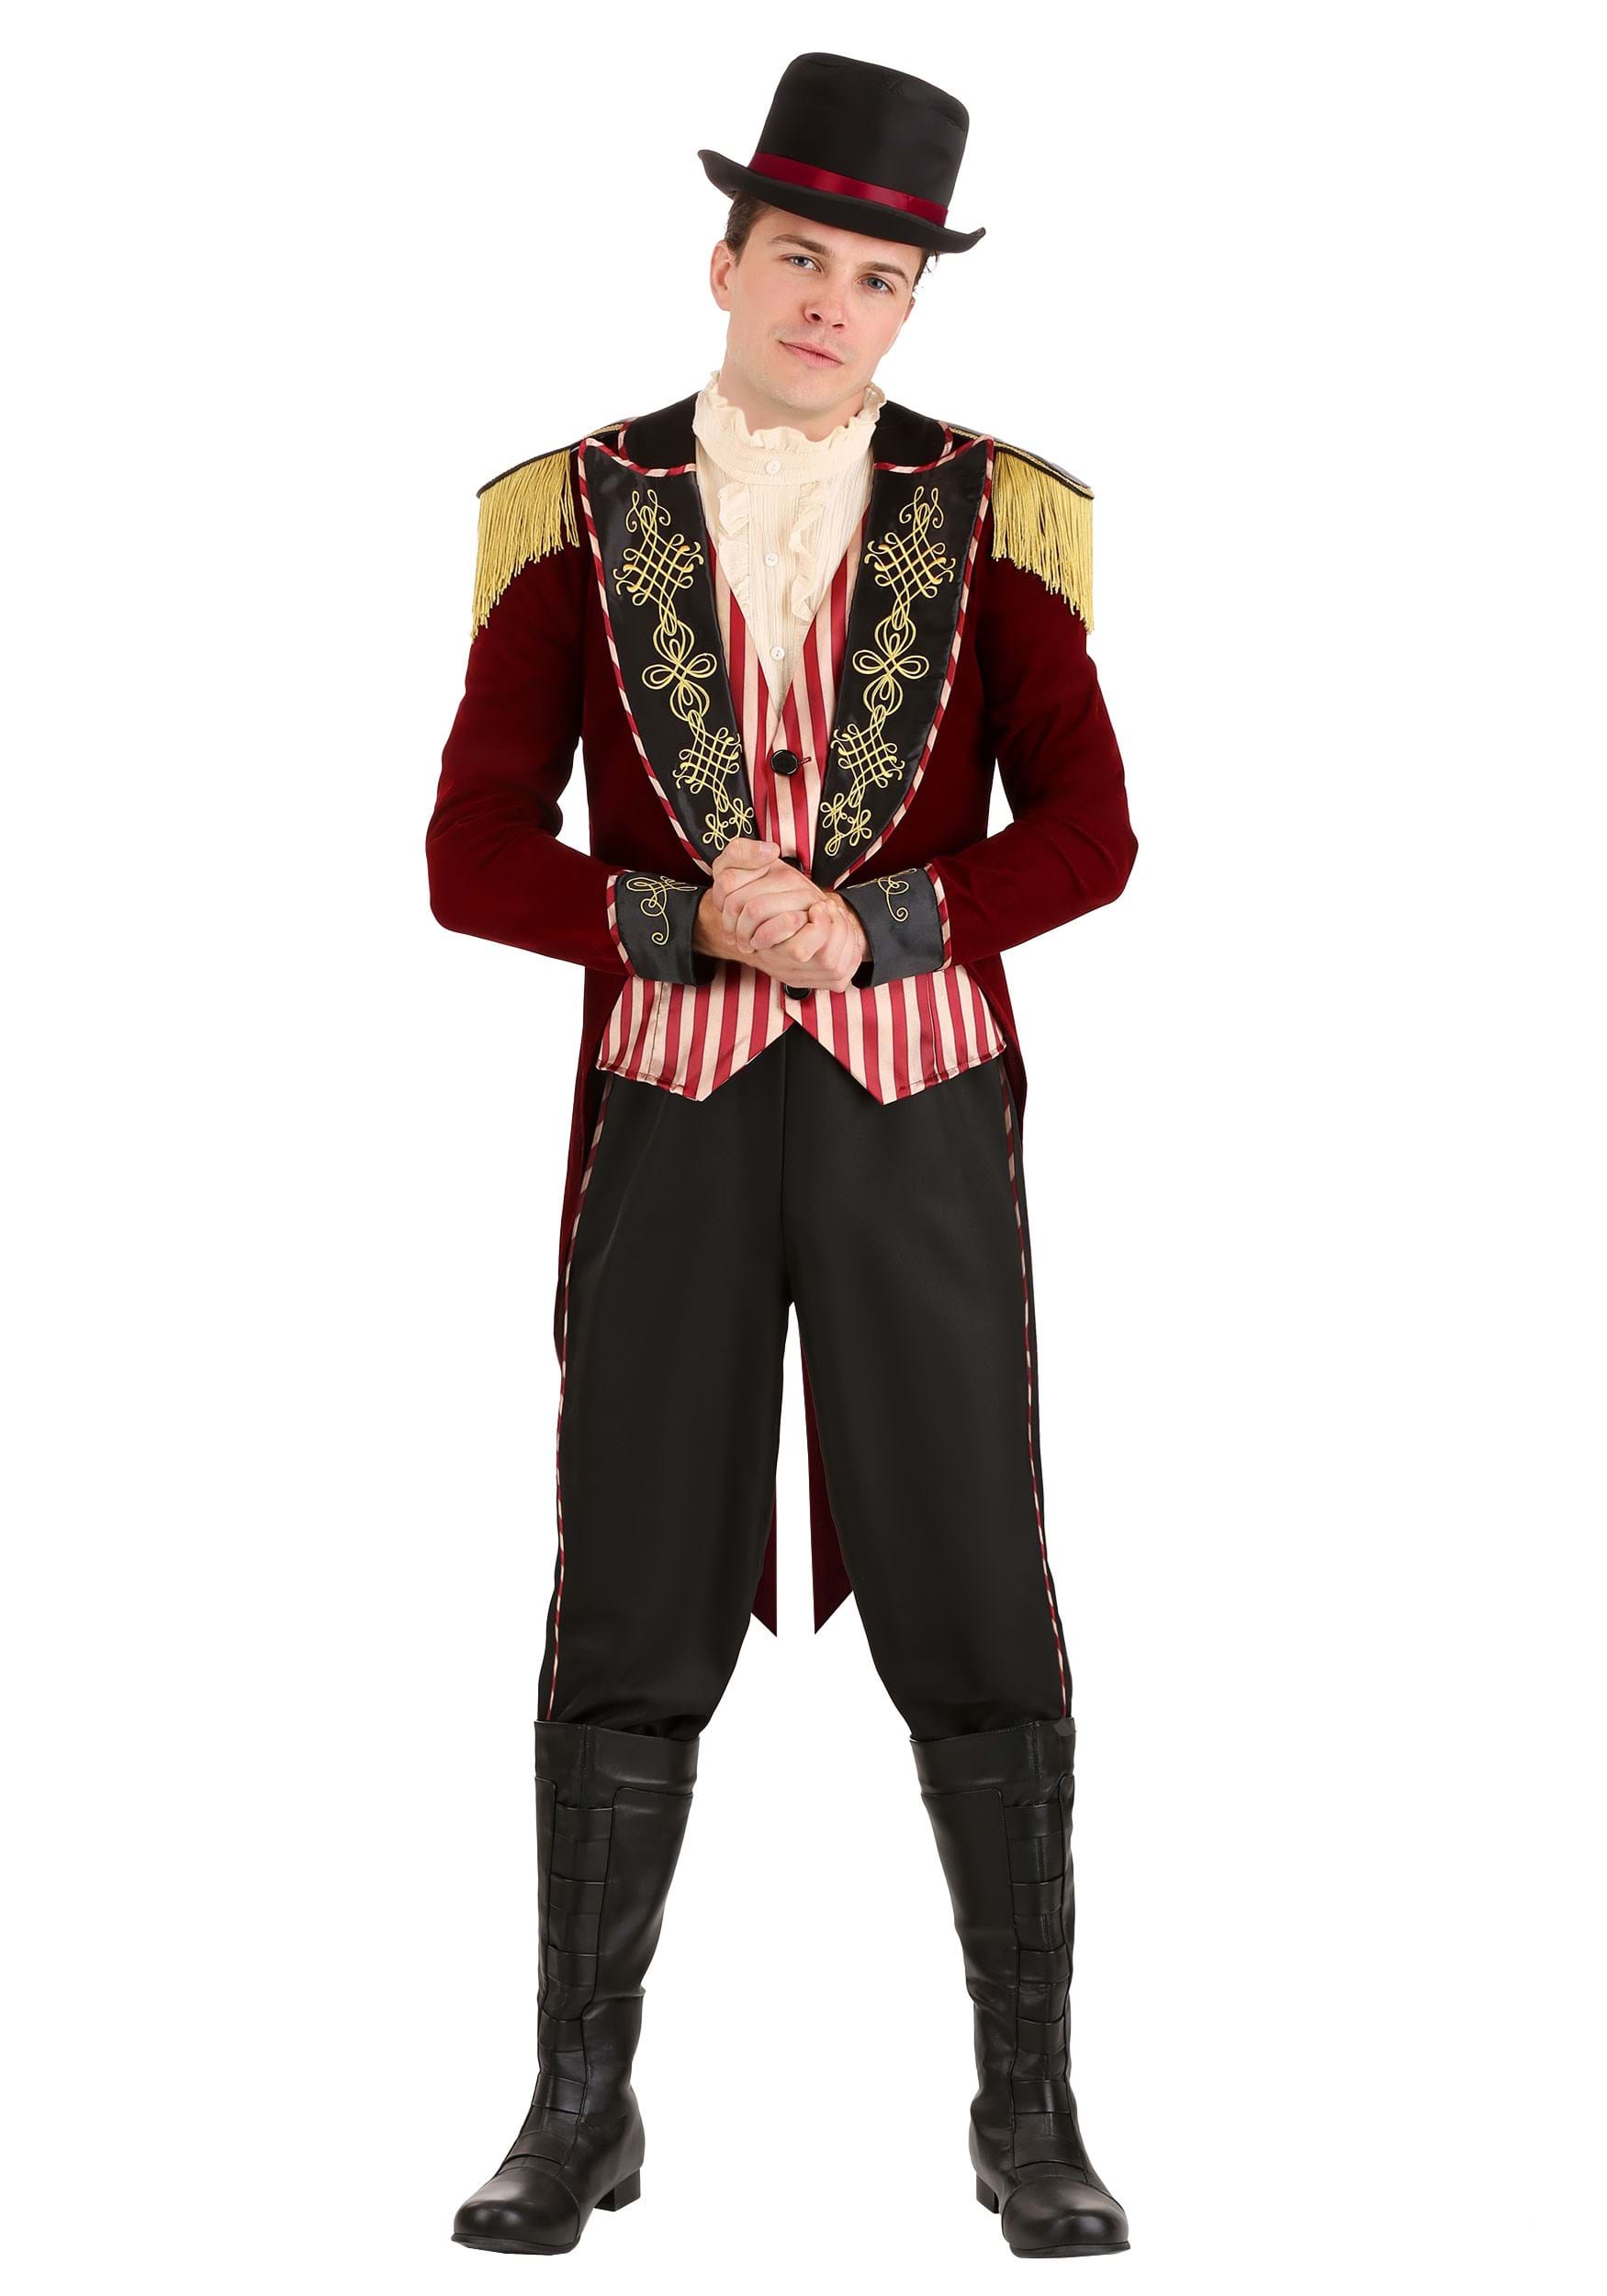 Photos - Fancy Dress FUN Costumes Men's Scary Ringmaster Costume Black/Red/Brown